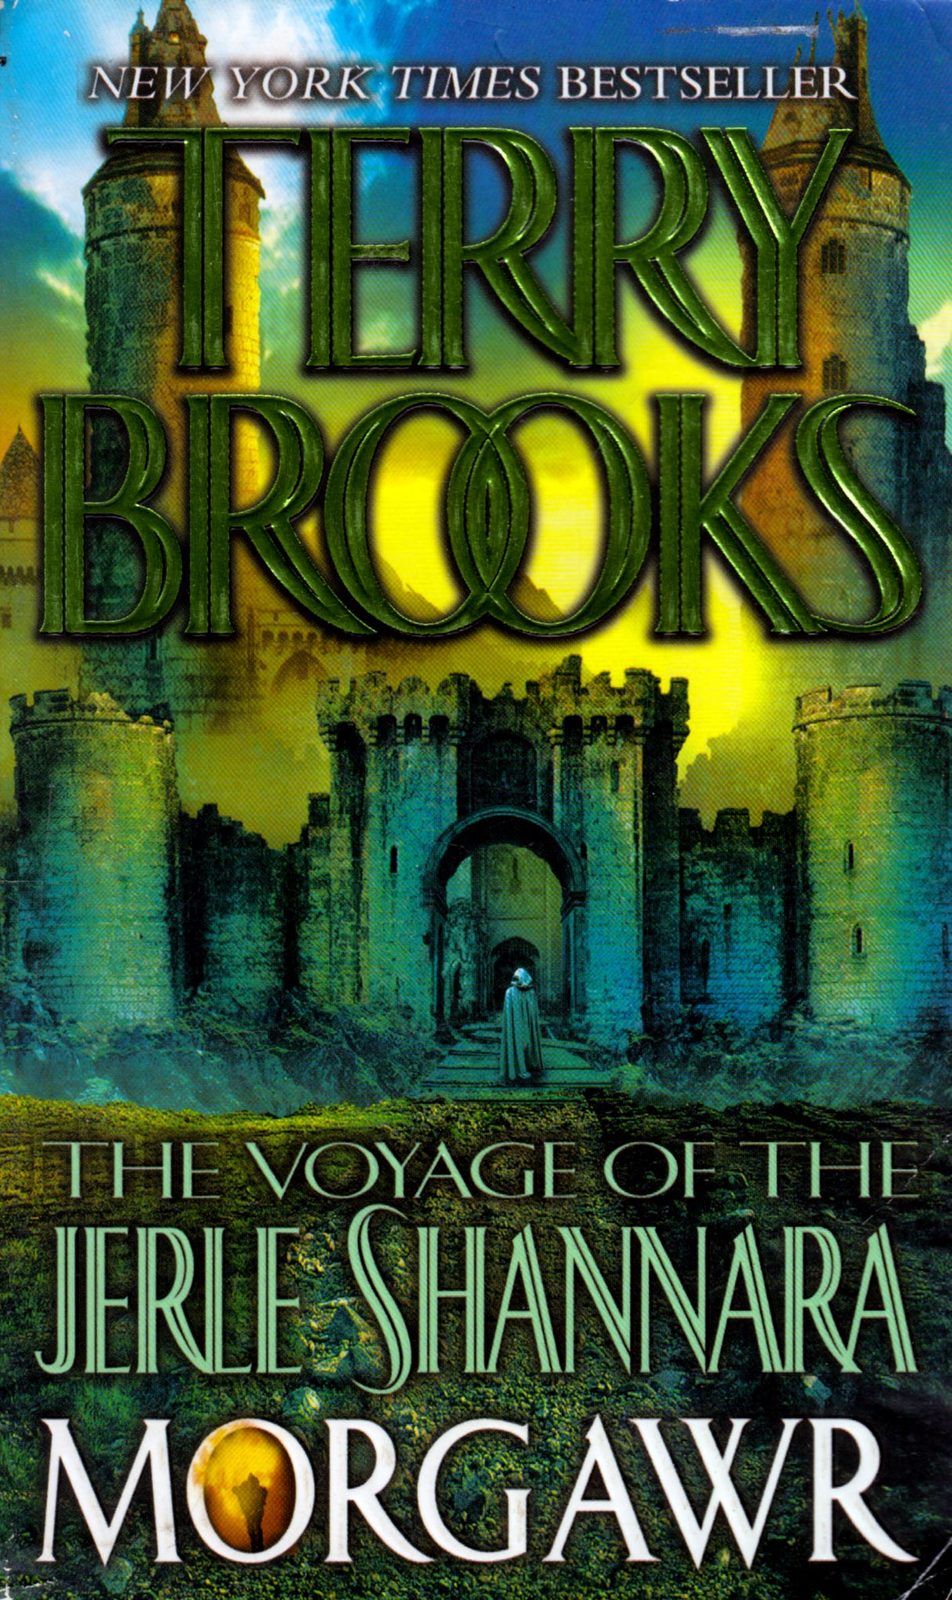 Primary image for Morgawr (The Voyage of the Jerle Shannara) by Terry Brooks / Fantasy Paperback